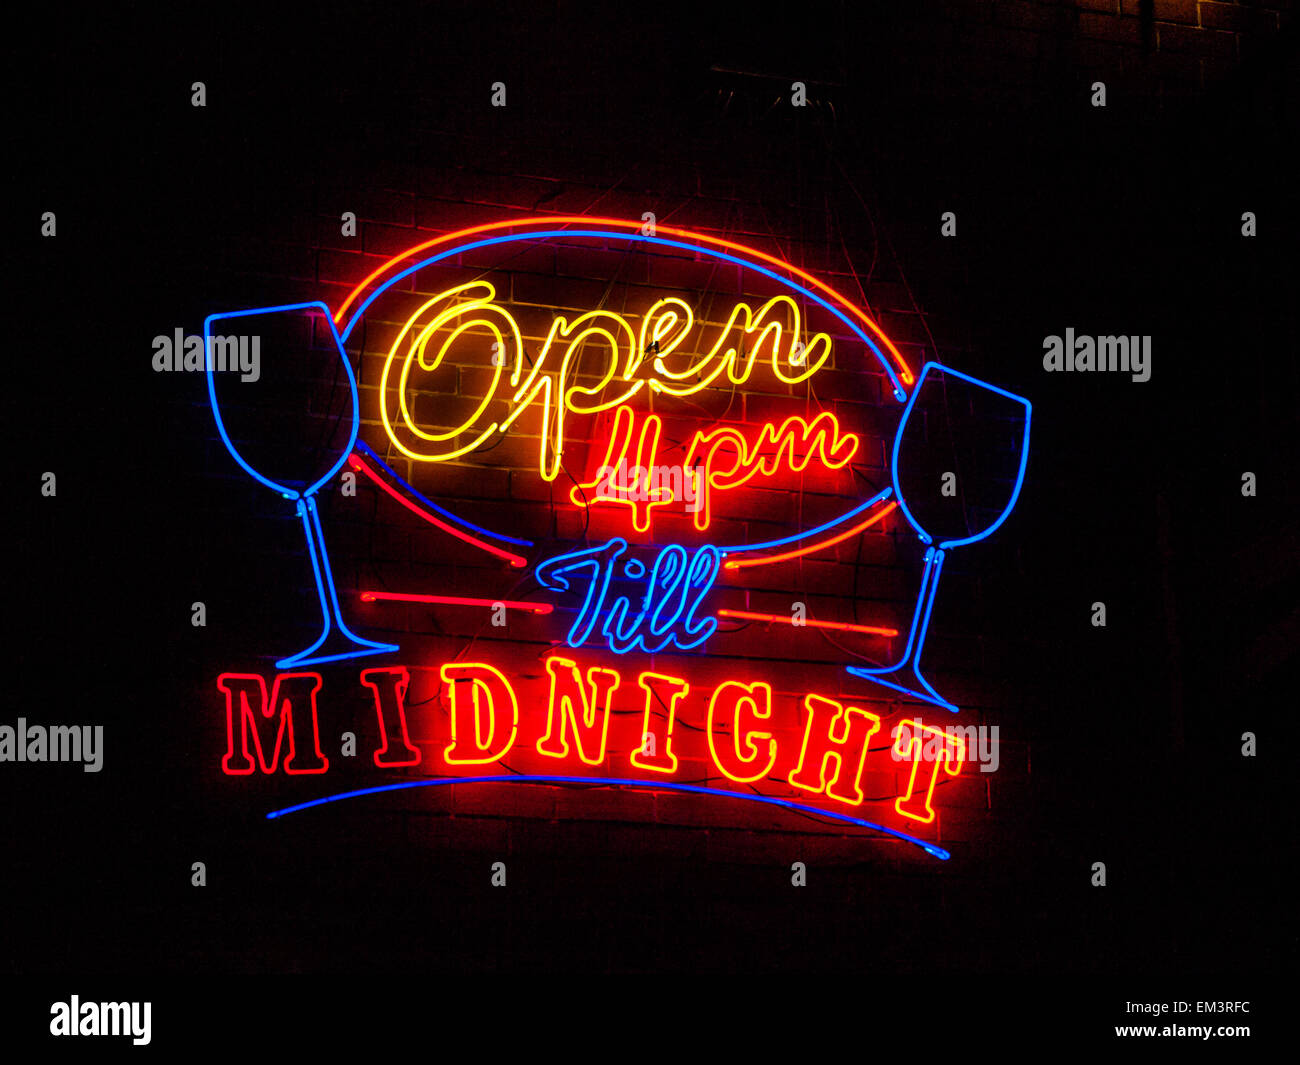 Red, green, purple and yellow neon sign of the words 'open 4pm till MIDNIGHT' on a black background. Stock Photo